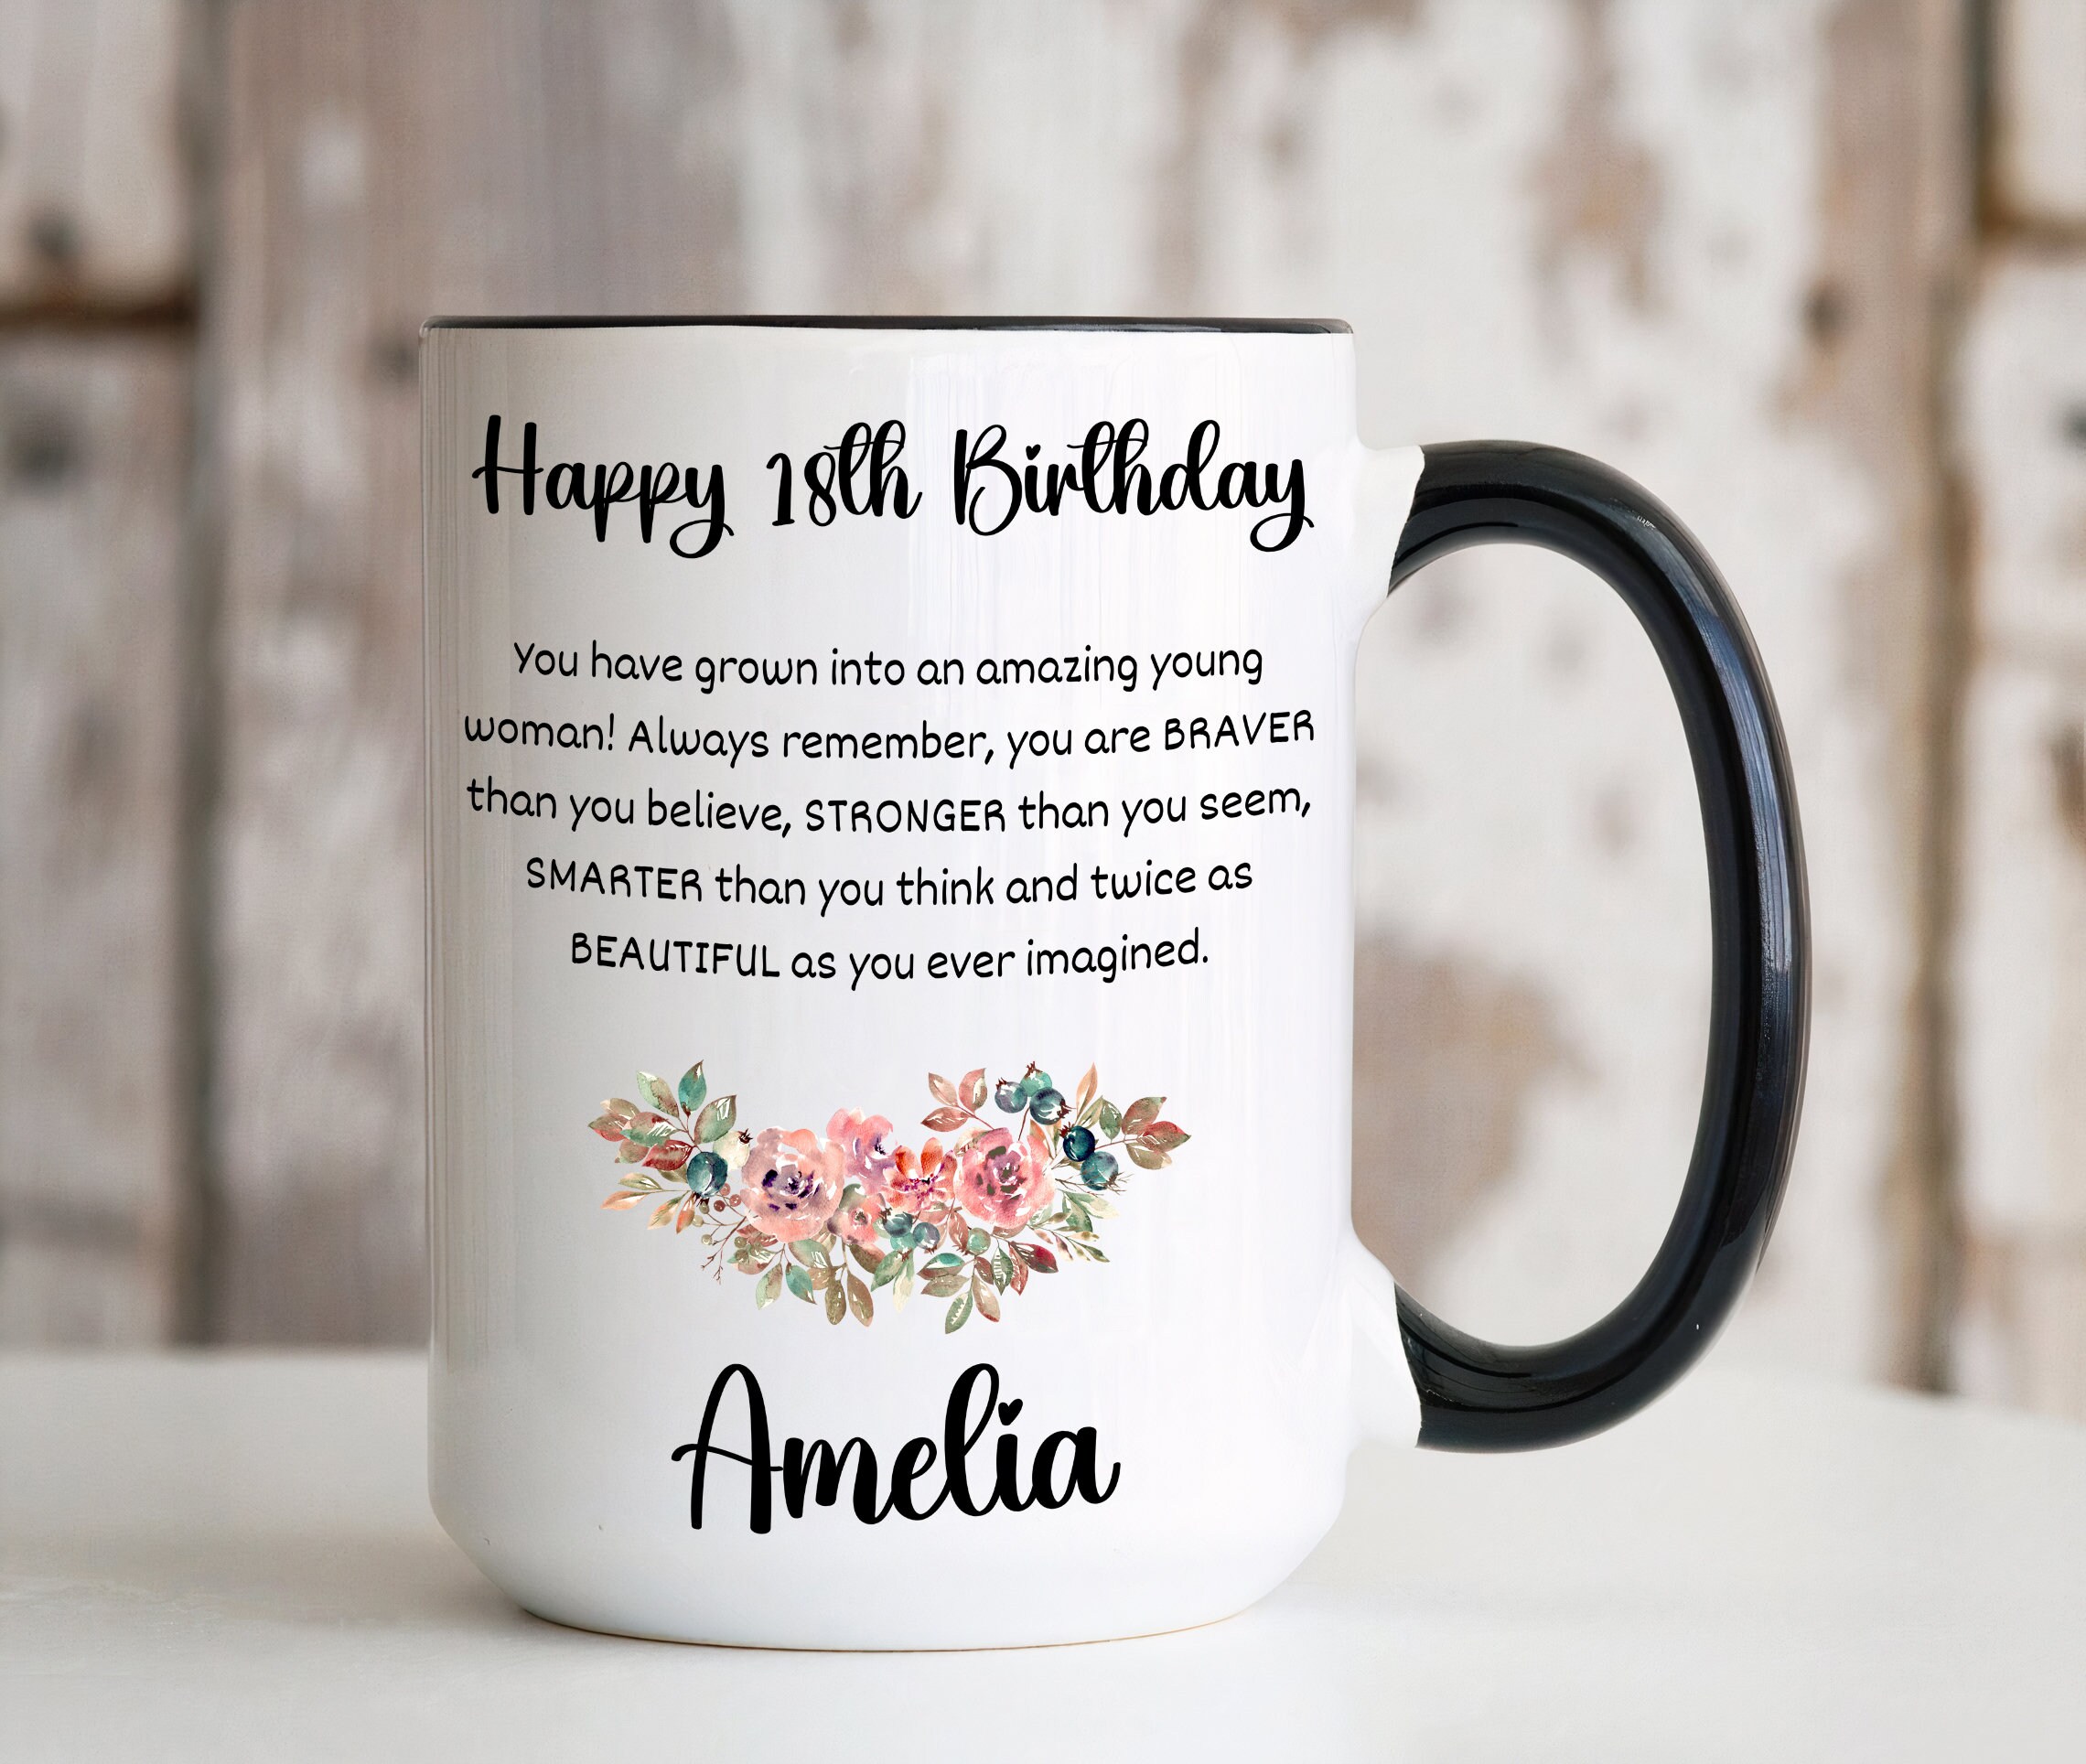 18th Birthday Gifts for Girls, 18 Year Old Girl Birthday Gifts, Happy  Birthday Gifts for 18 Year Old Girl, Daughter, Sister, Granddaughter, BFF